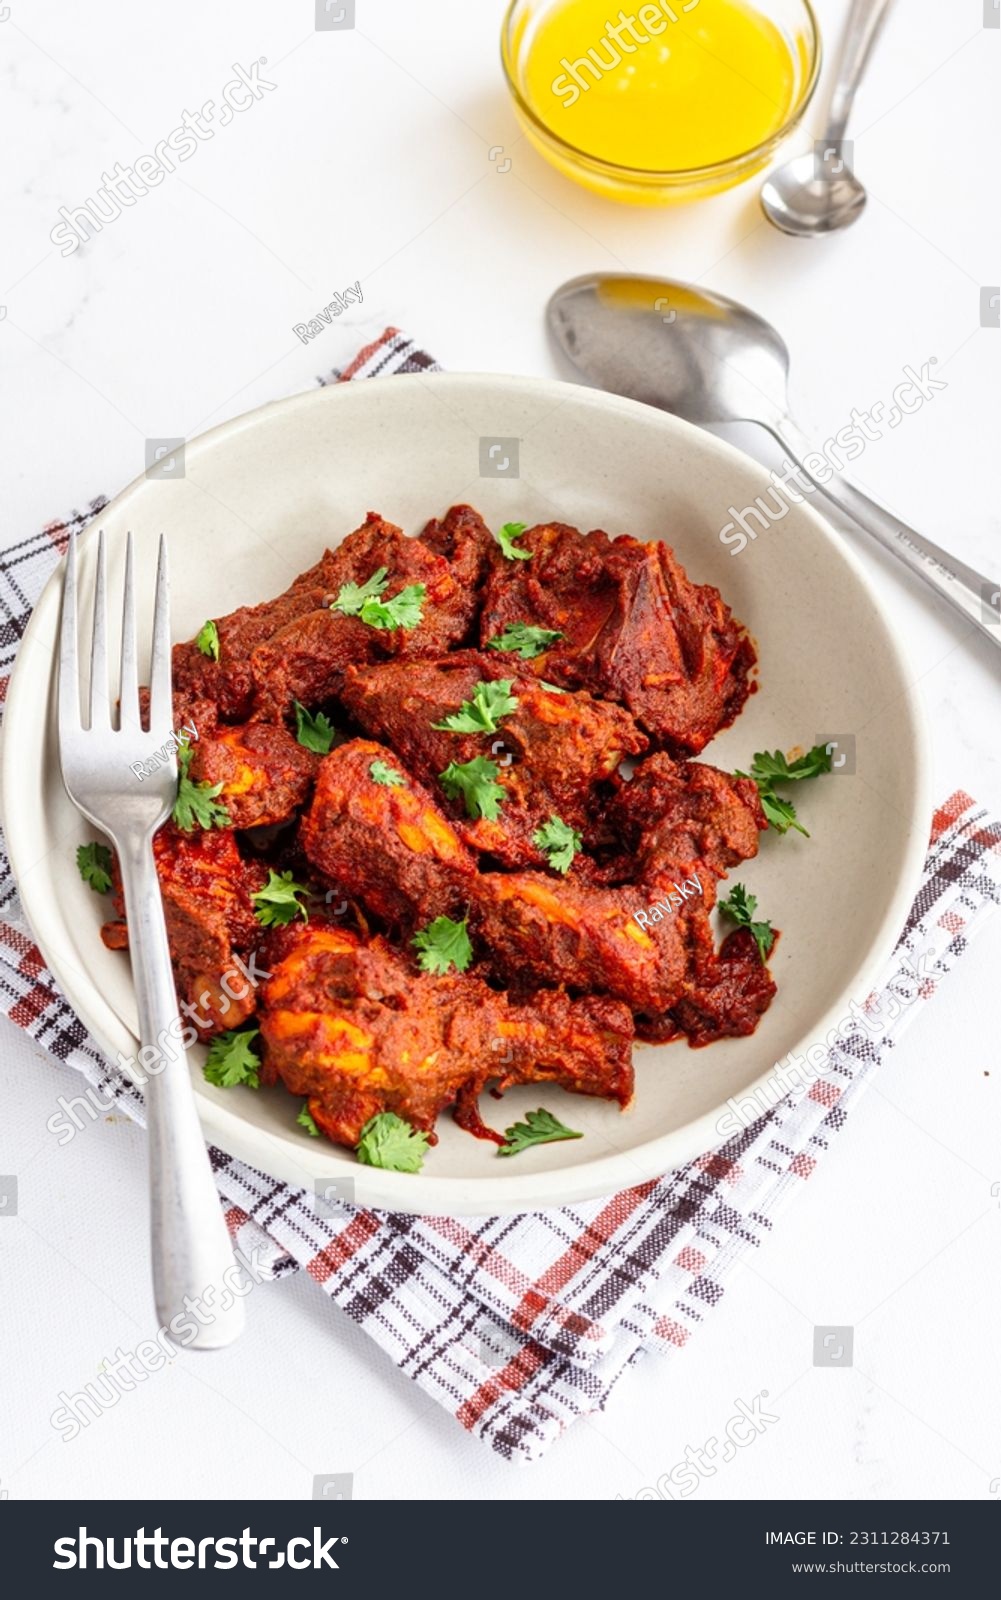 Spicy Indian Stir-Fried Chicken in a Bowl Top Down Photo on White Background Vertical Photo #2311284371